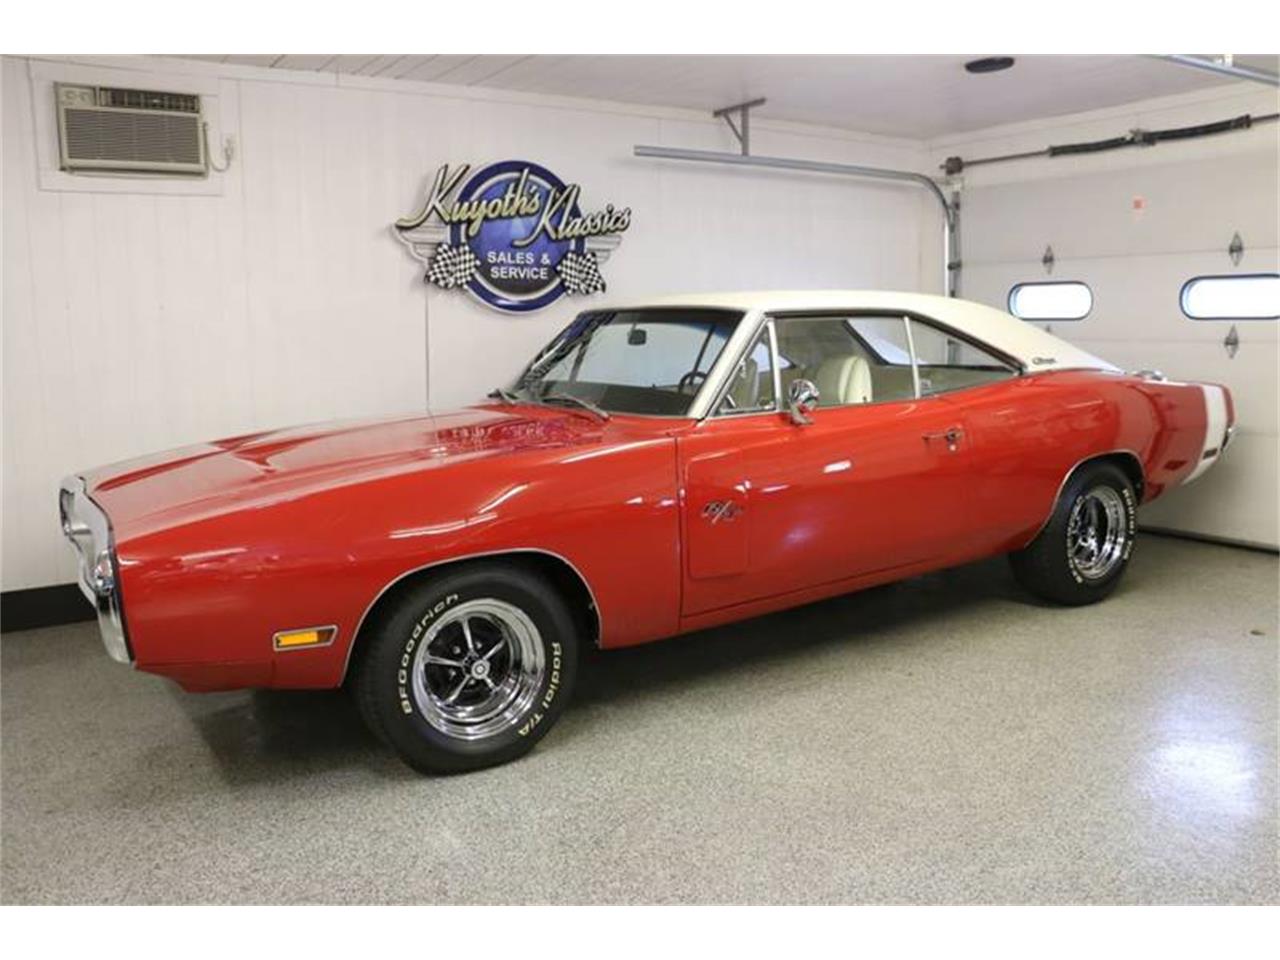 1970 Dodge Charger for sale in Stratford, WI